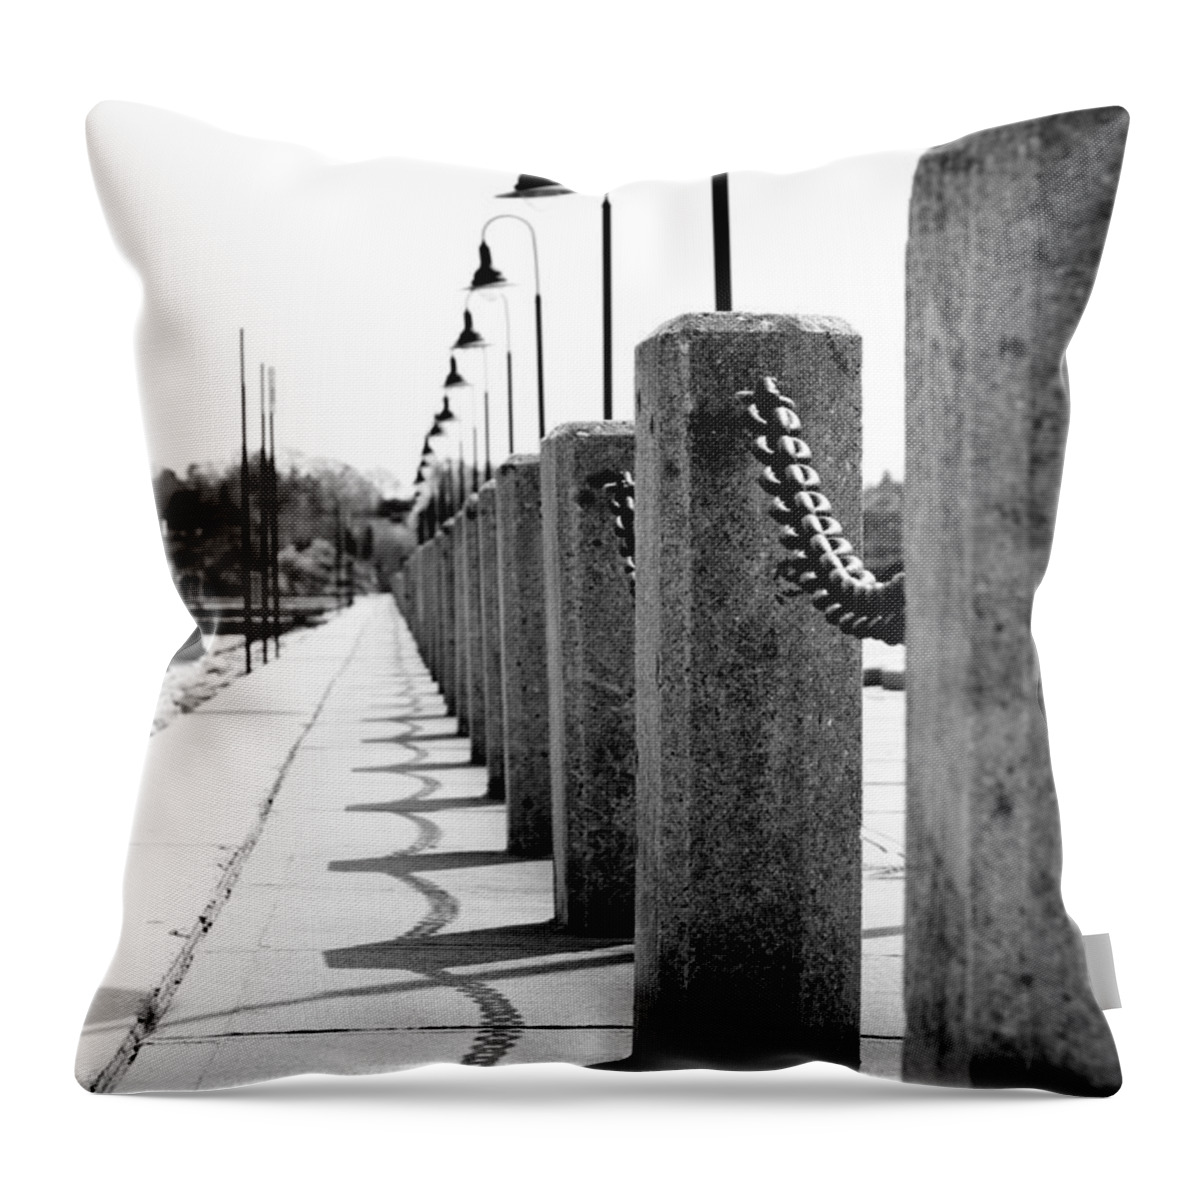 Posts Throw Pillow featuring the photograph Repetition by Greg Fortier